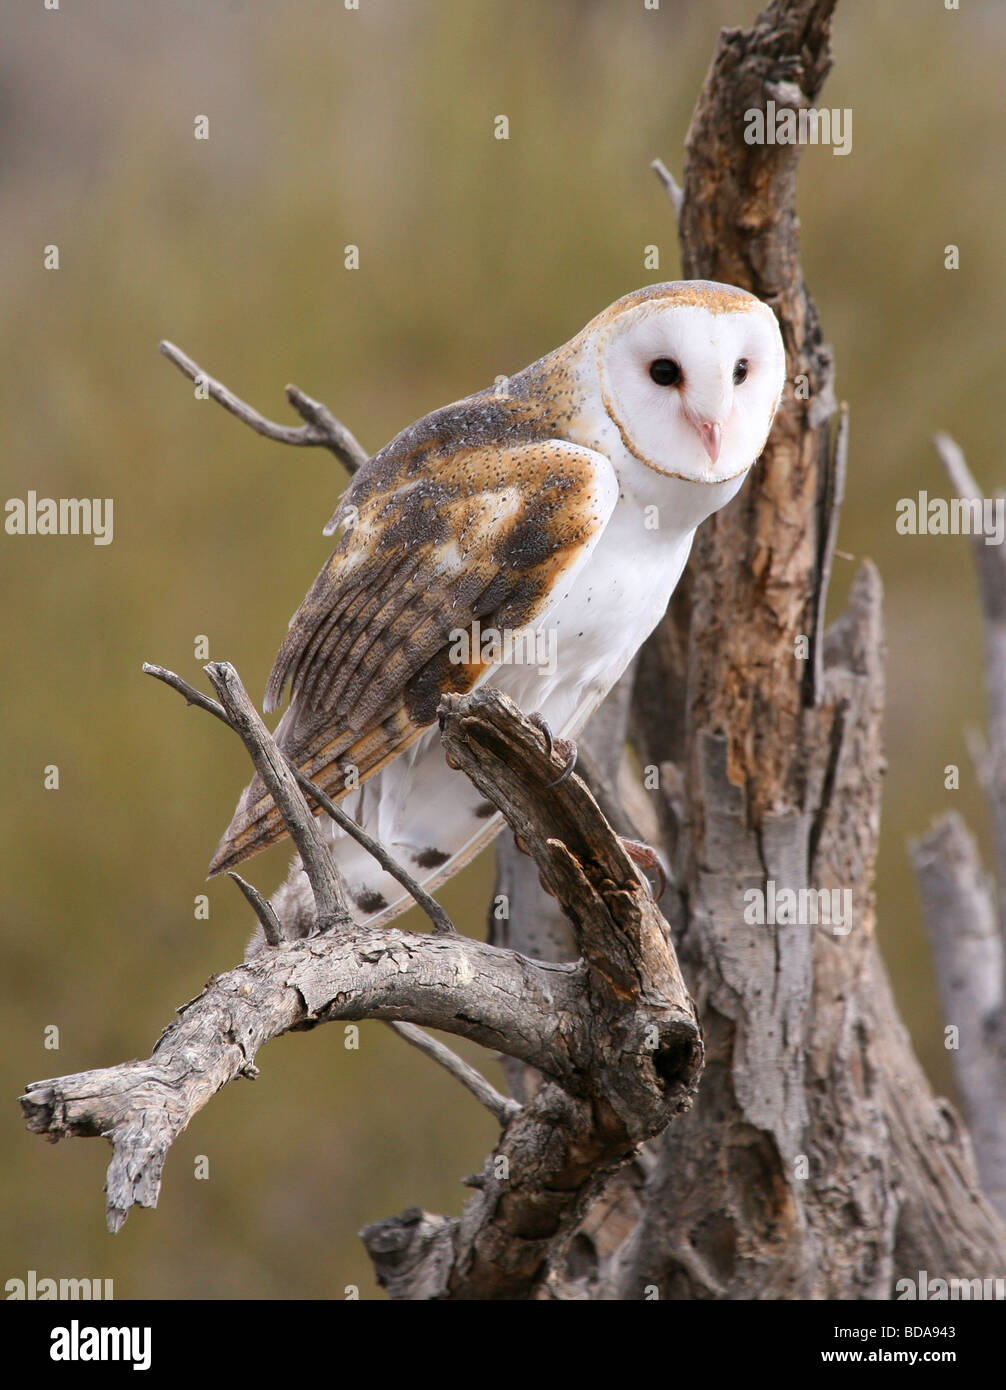 Barn Owl perched on a tree Stock Photo